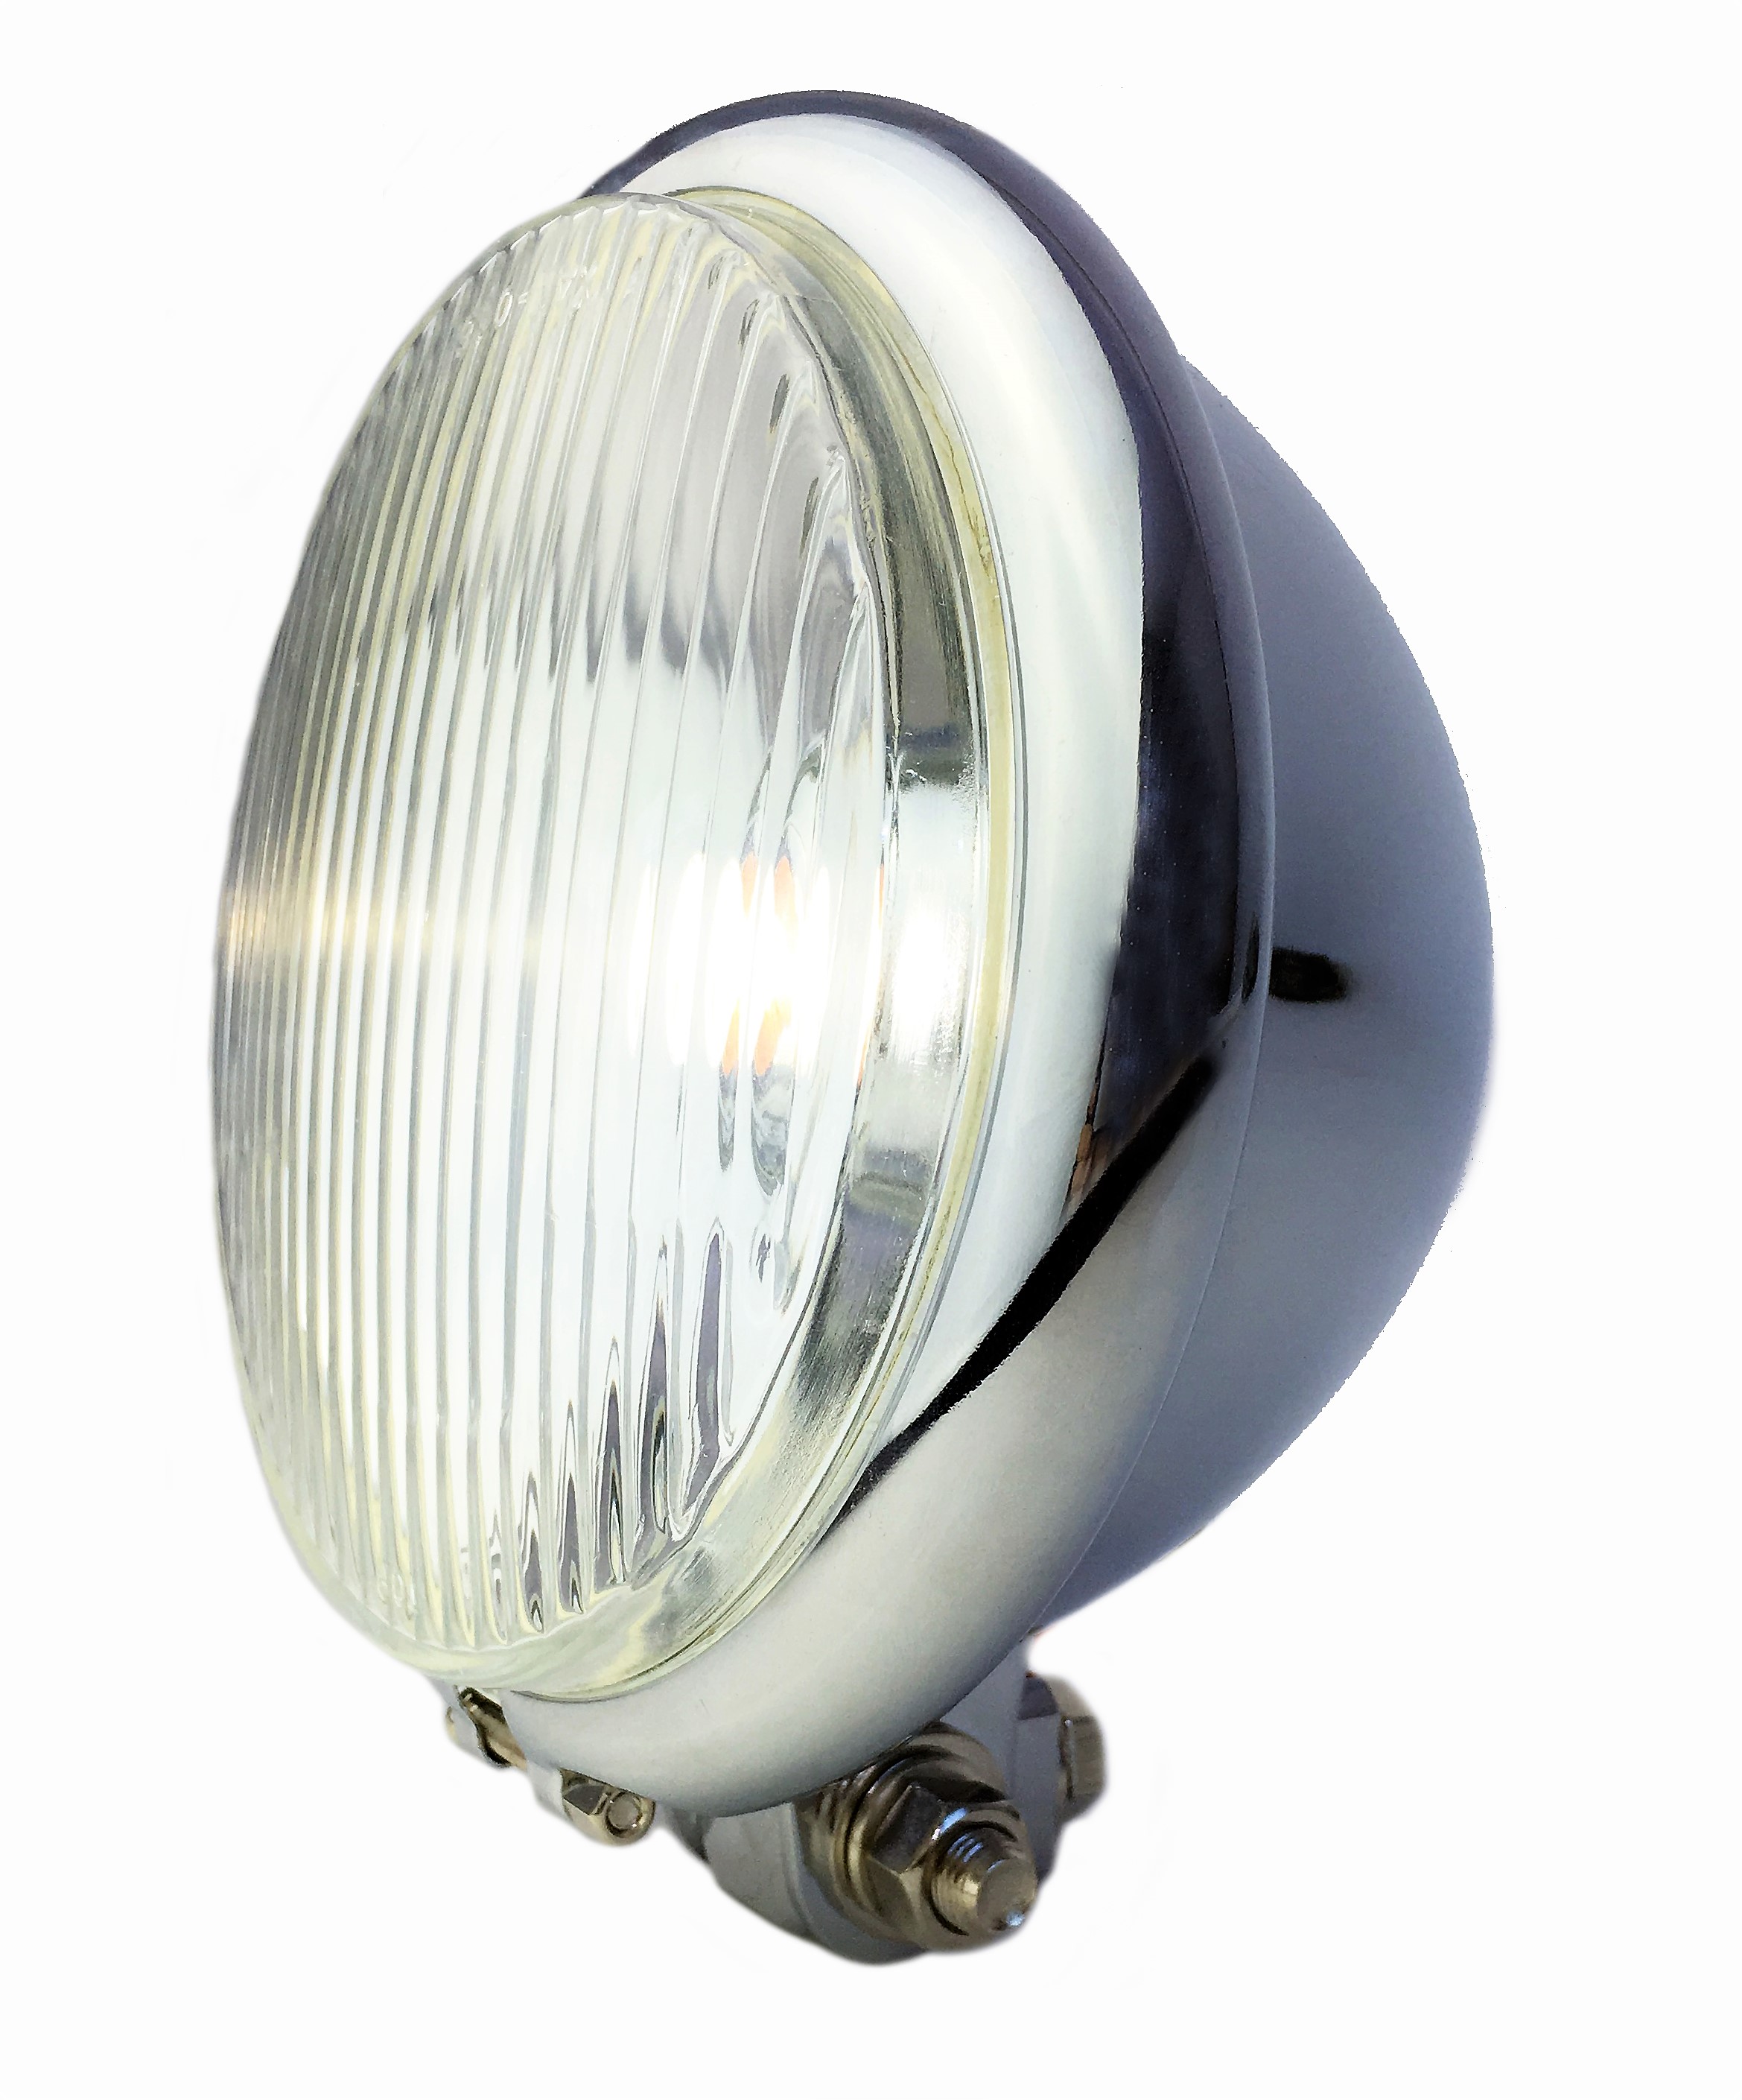 Old Bates style front light LED, 15cm, chrome plated